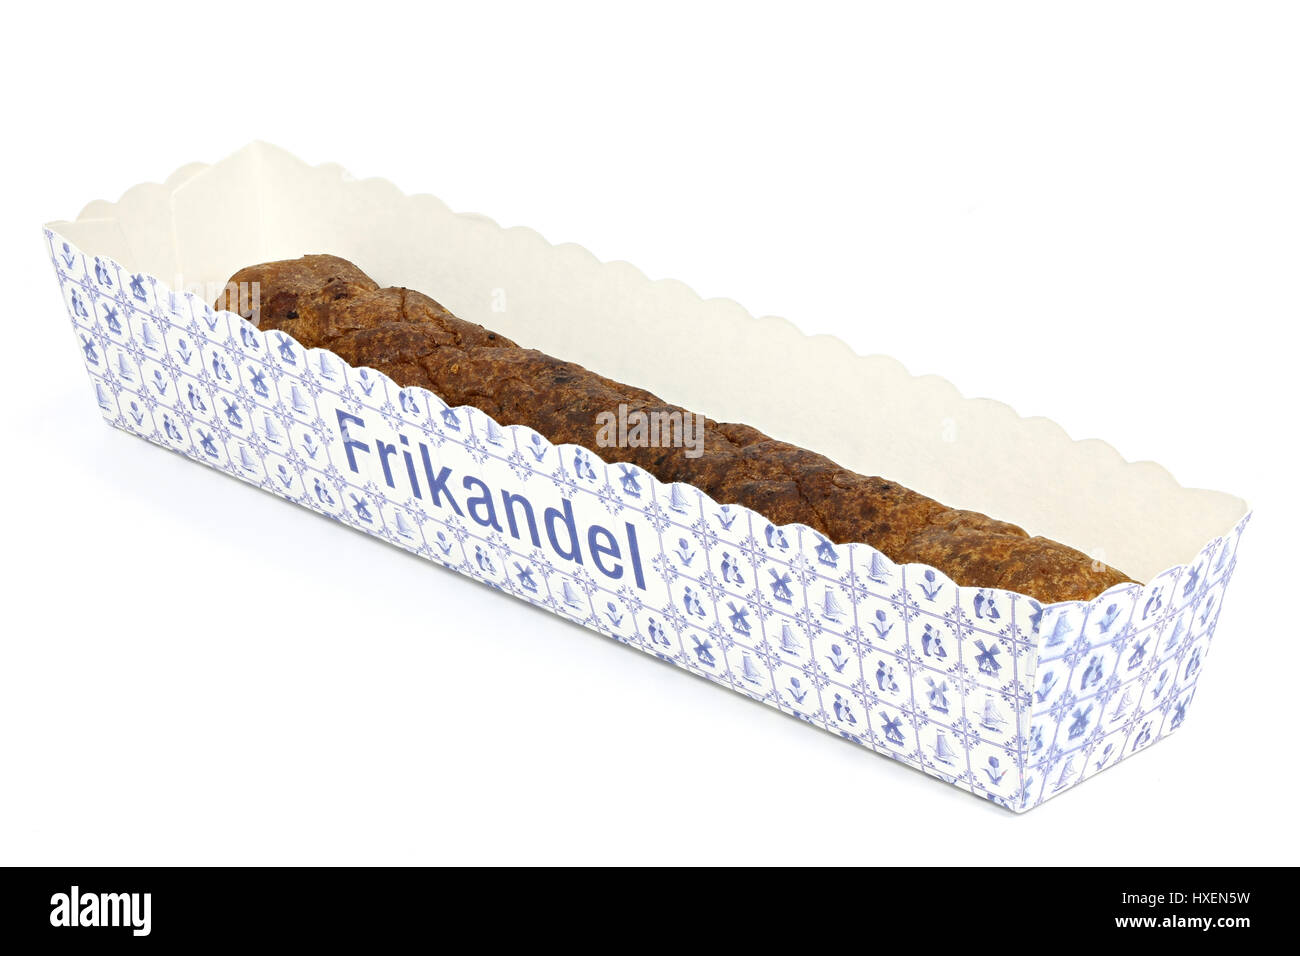 traditional Dutch frikandel in a cardboard container isolated on white background Stock Photo